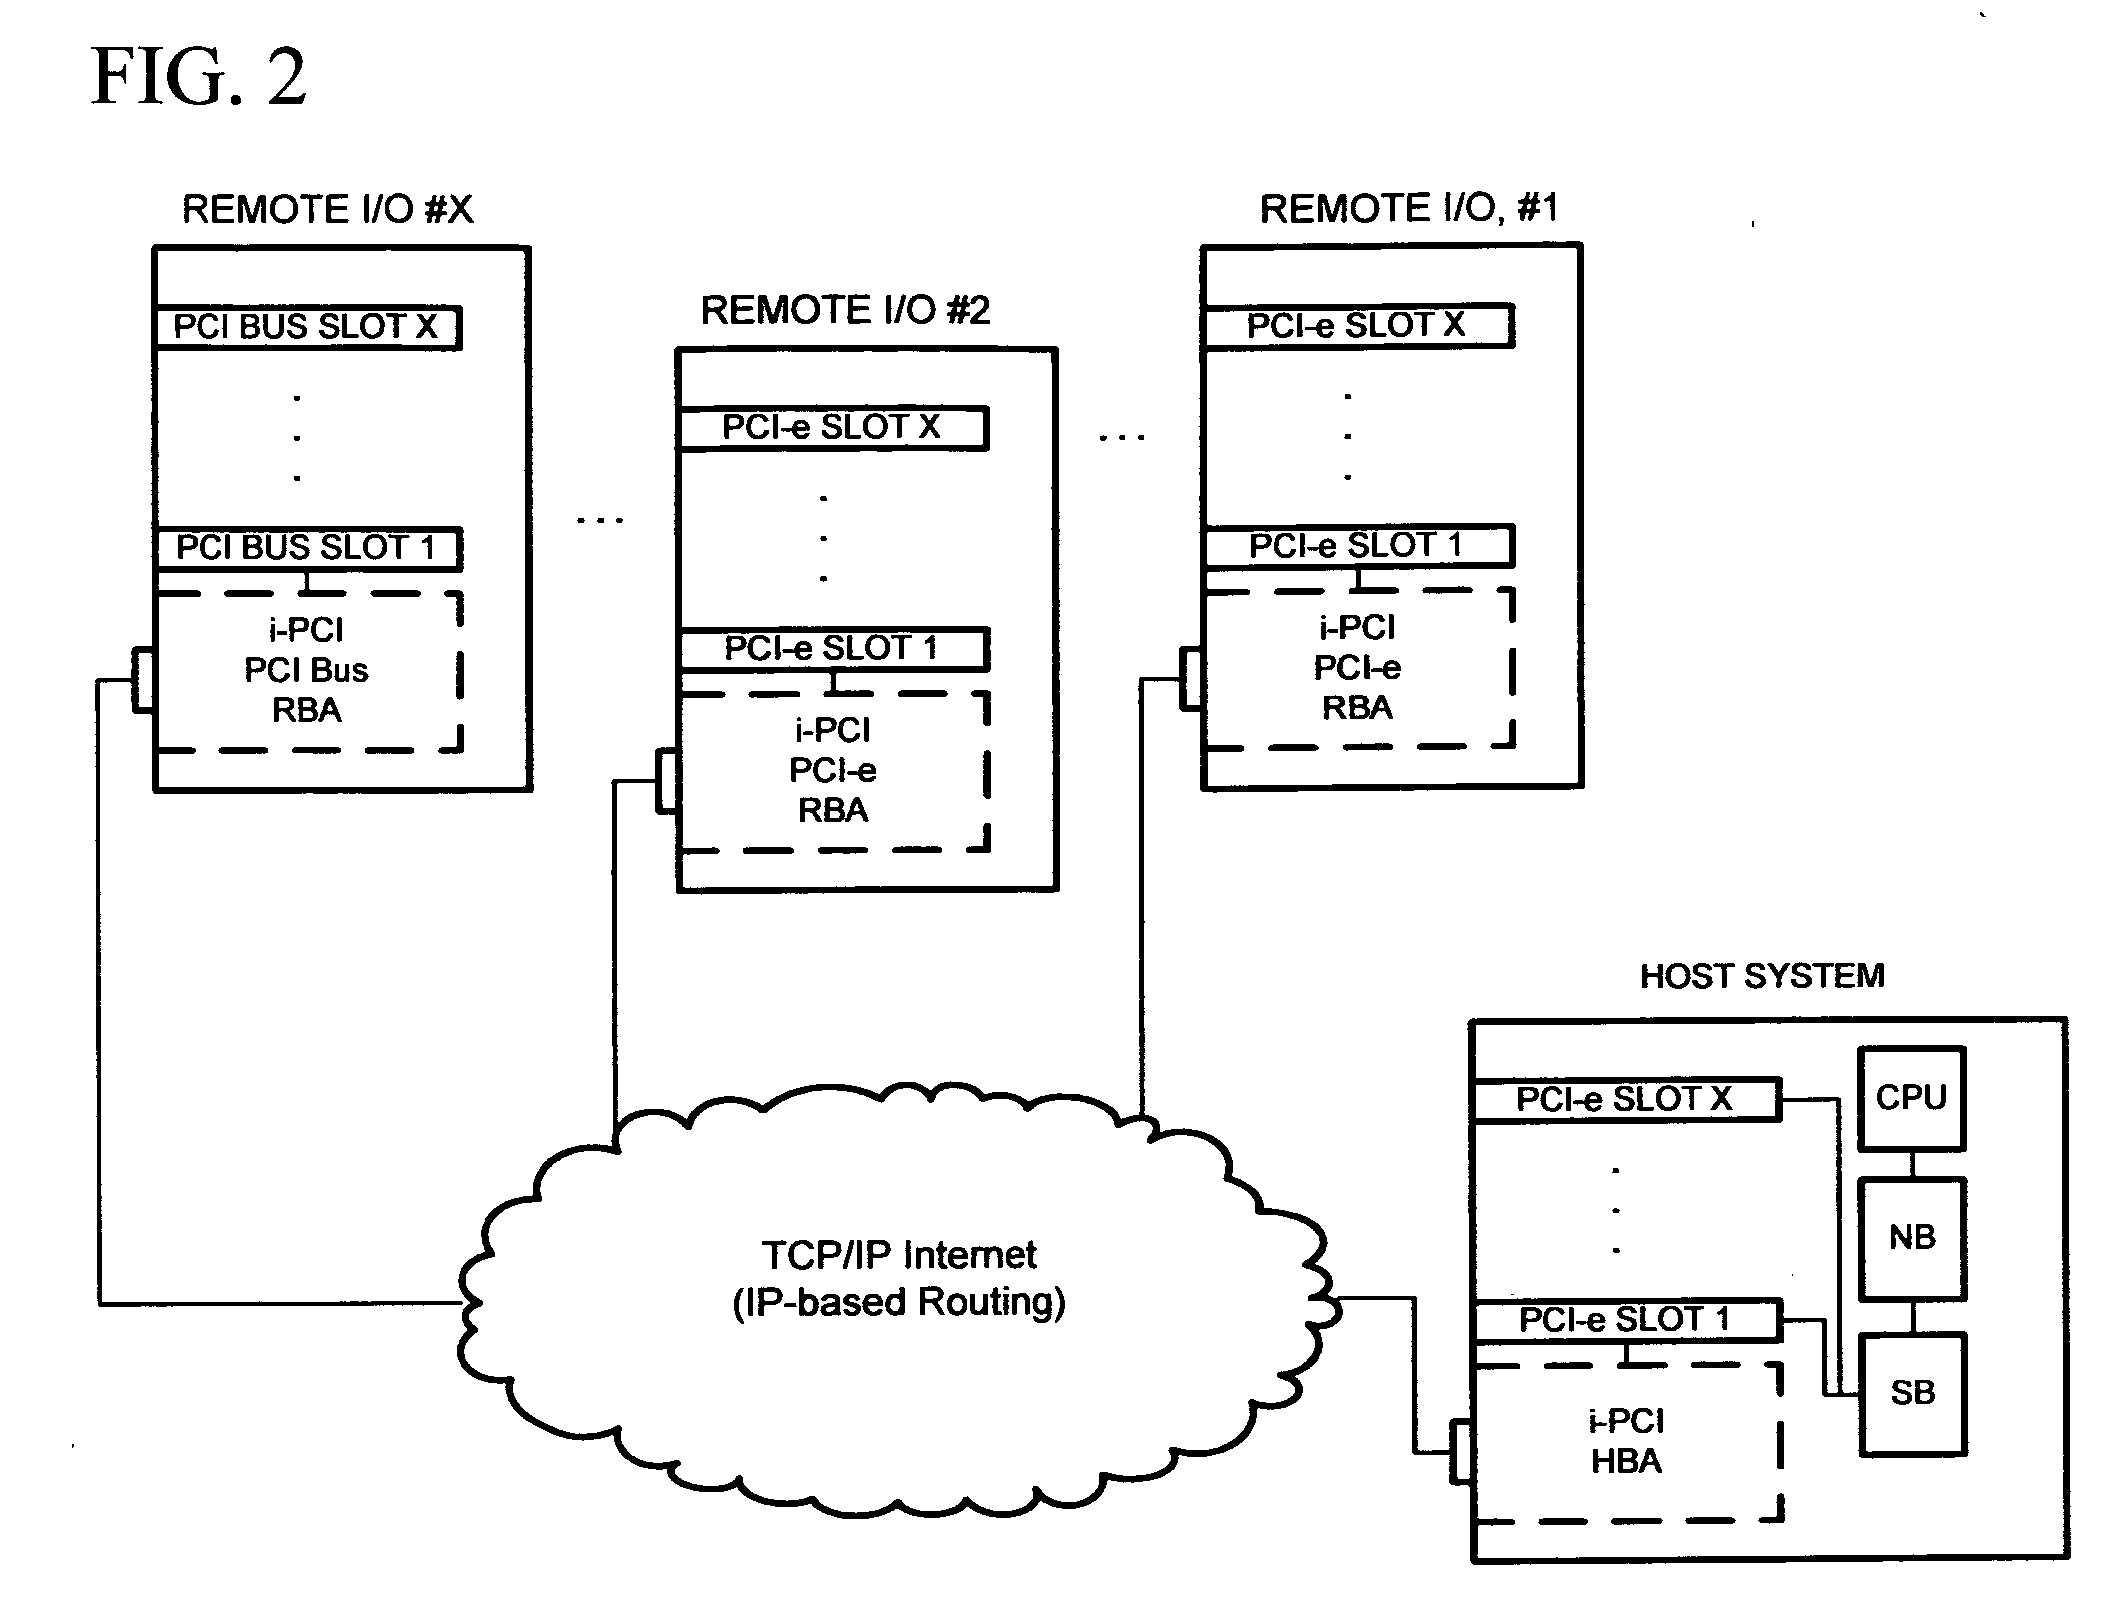 Software-based virtual PCI system